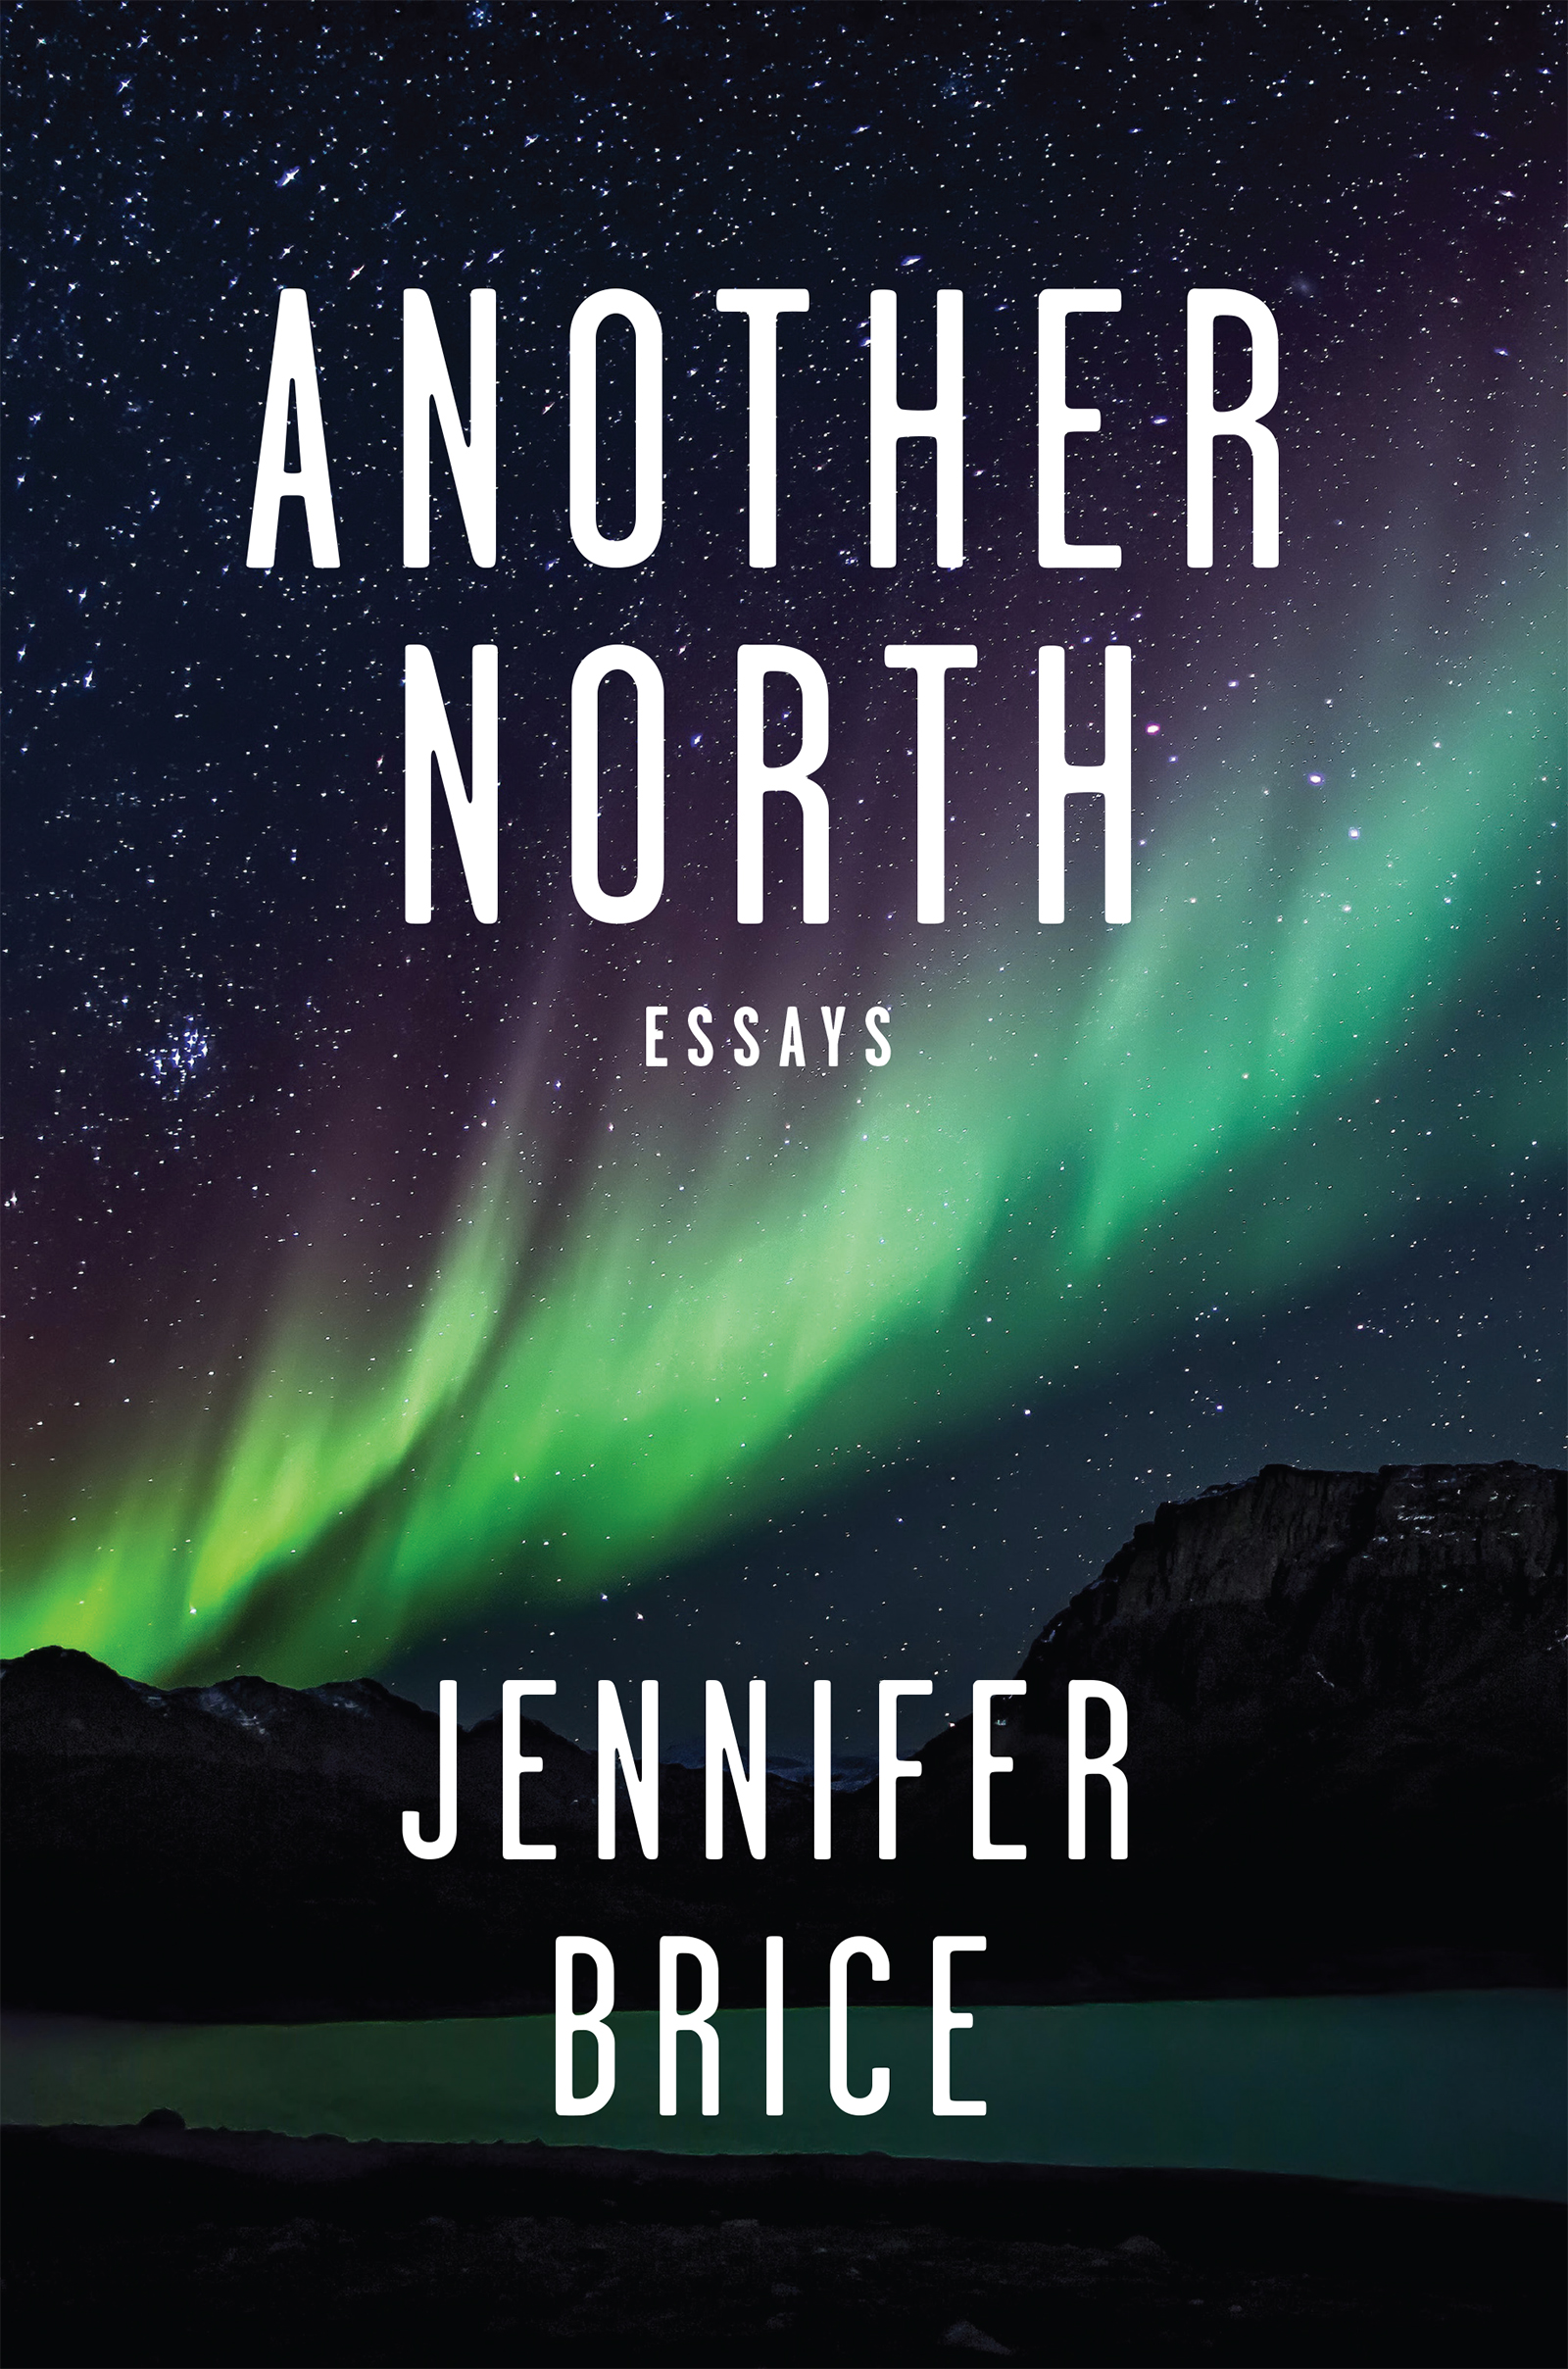 A photograph of an aurora borealis with white text reading "Another North, Essays, Jennifer Brice"